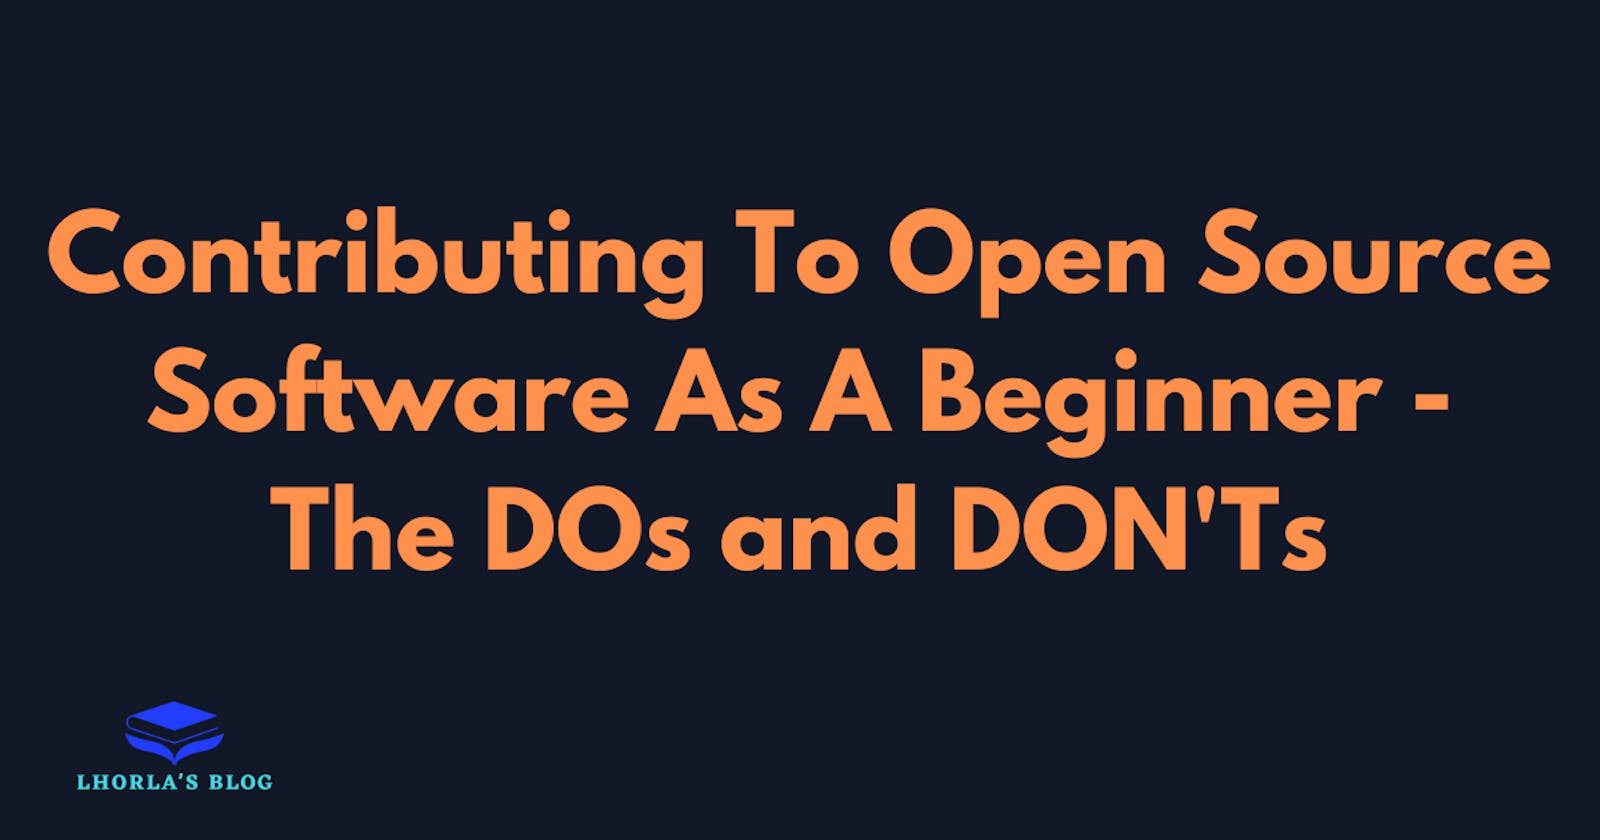 Contributing To Open Source Software As A Beginner: The DOs and DON'Ts